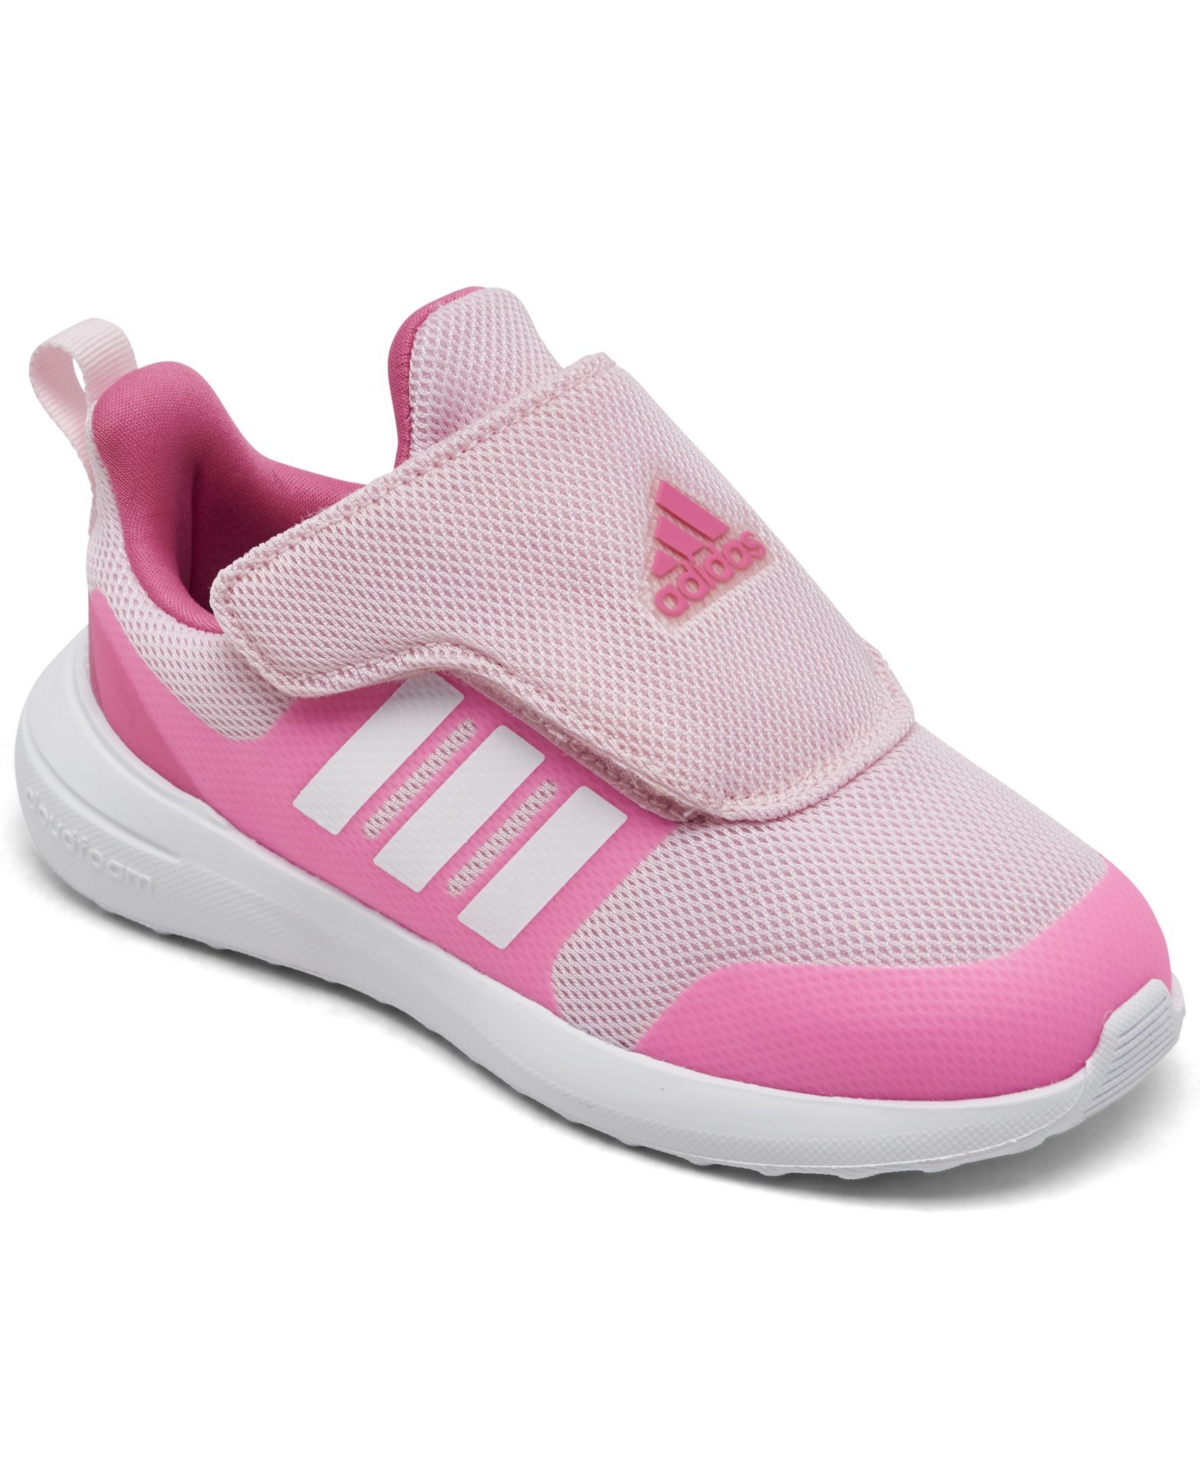 Adidas Originals Babies' Toddler Girls Fortarun 2.0 Stay-put Casual Sneakers From Finish Line In Clear Pink,white,pink